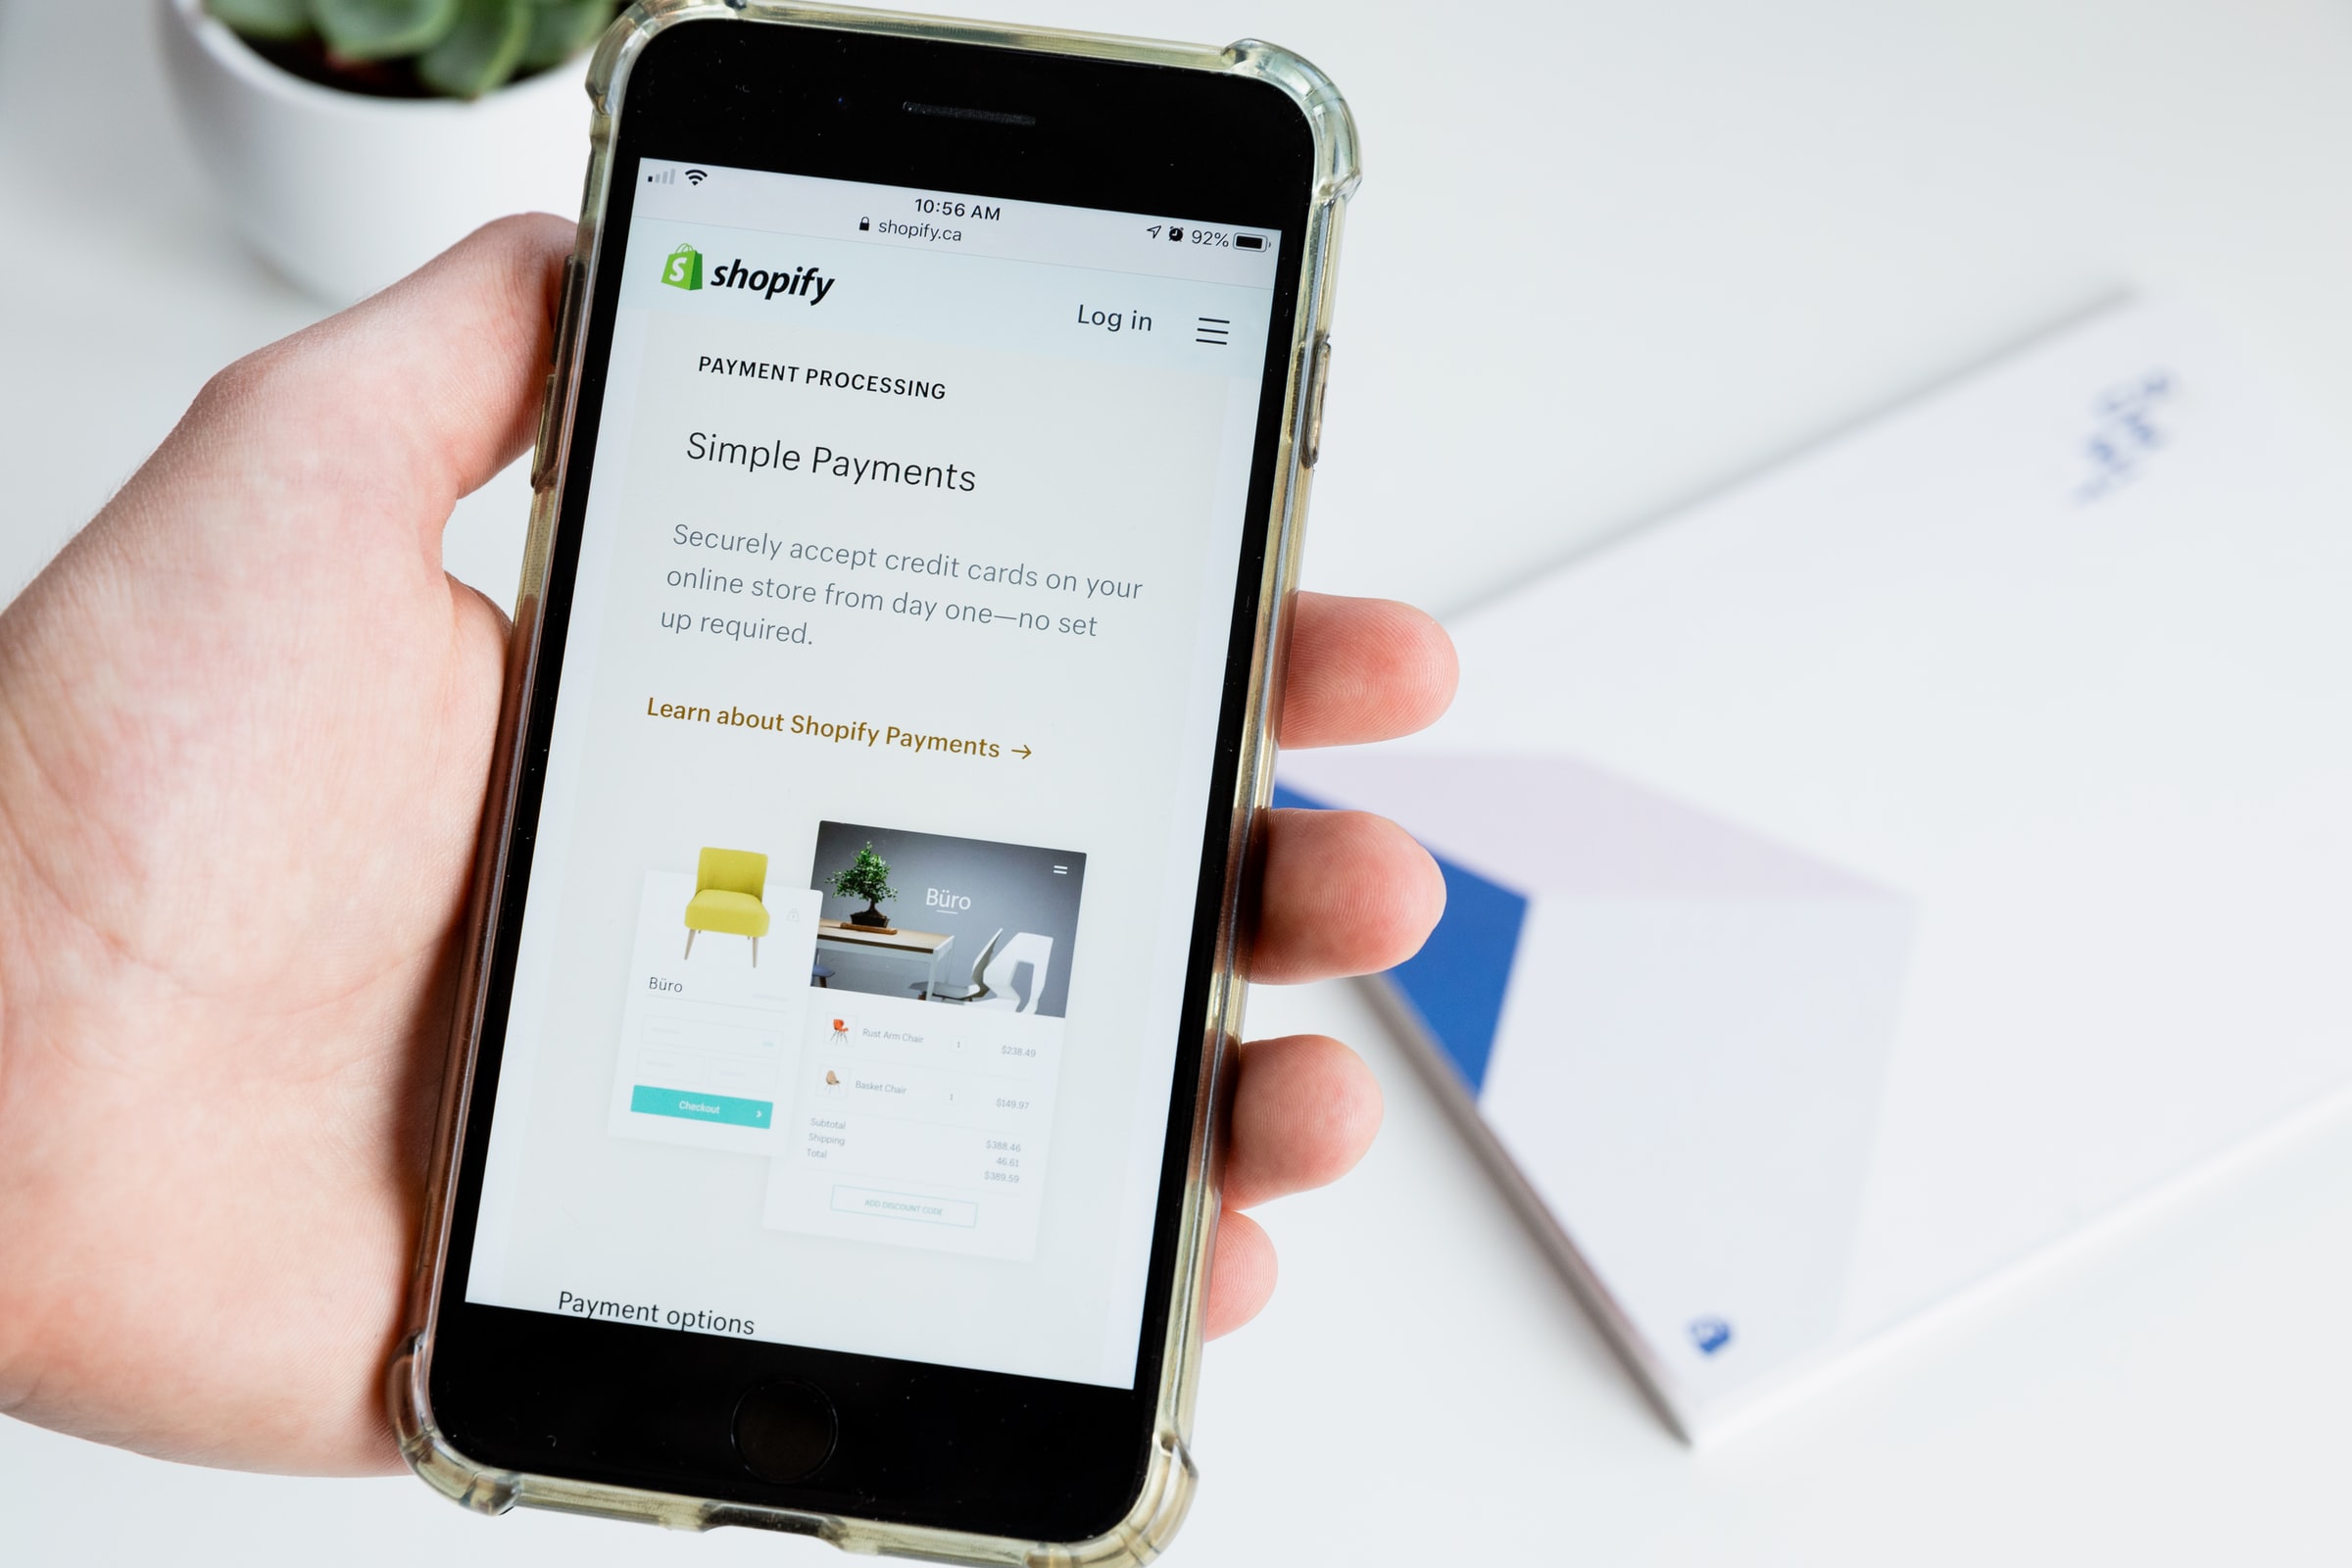 Shopify app on mobile phone